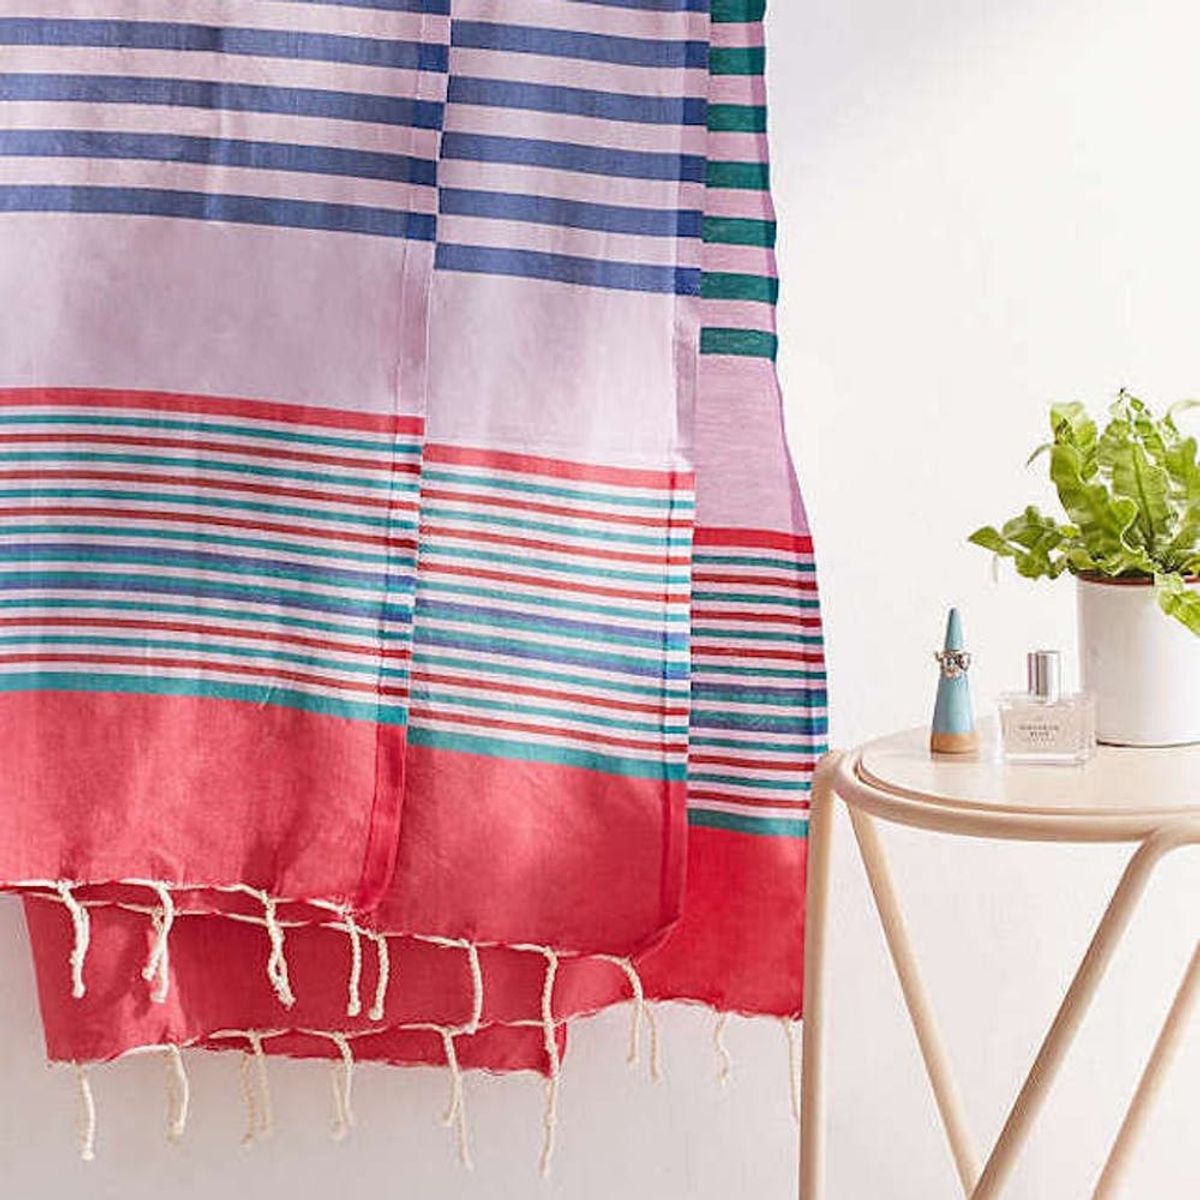 Update Your Bathroom for Spring With These Affordable Urban Outfitters Finds